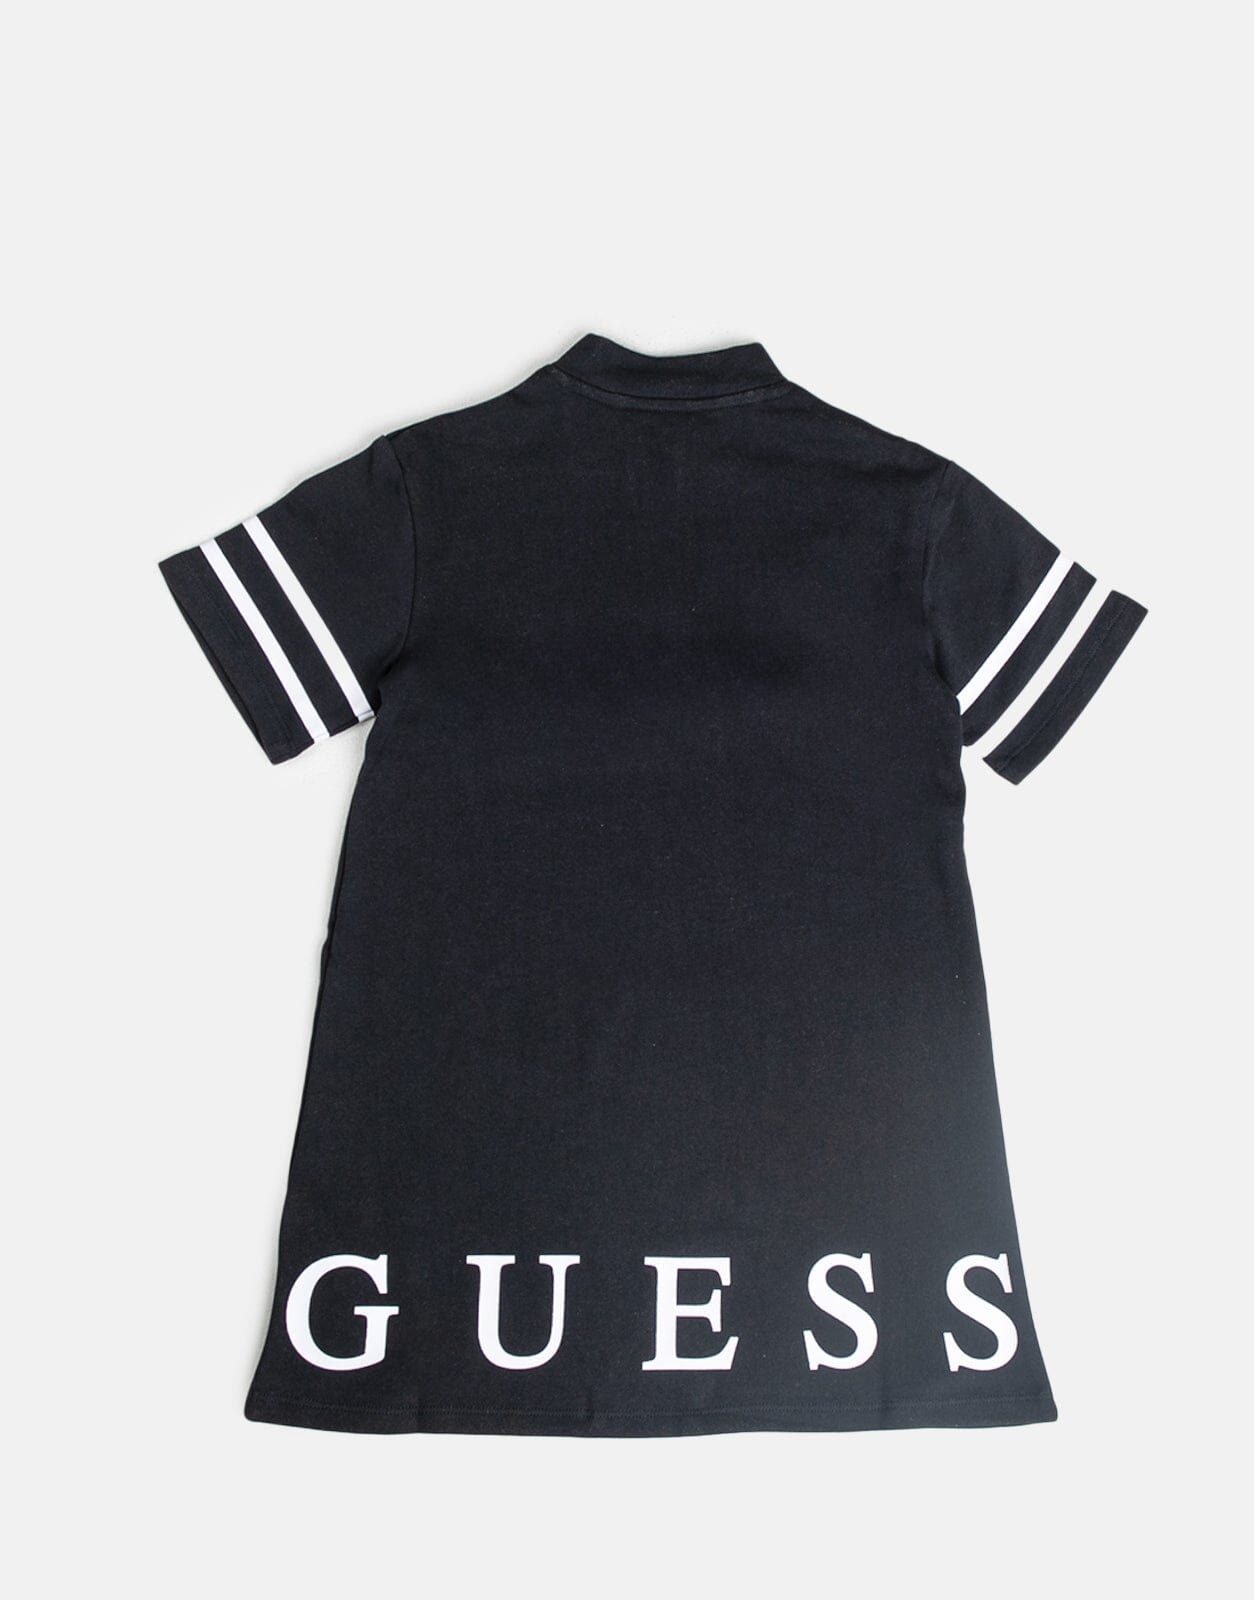 Guess Kids French Terry Dress BLK - Subwear